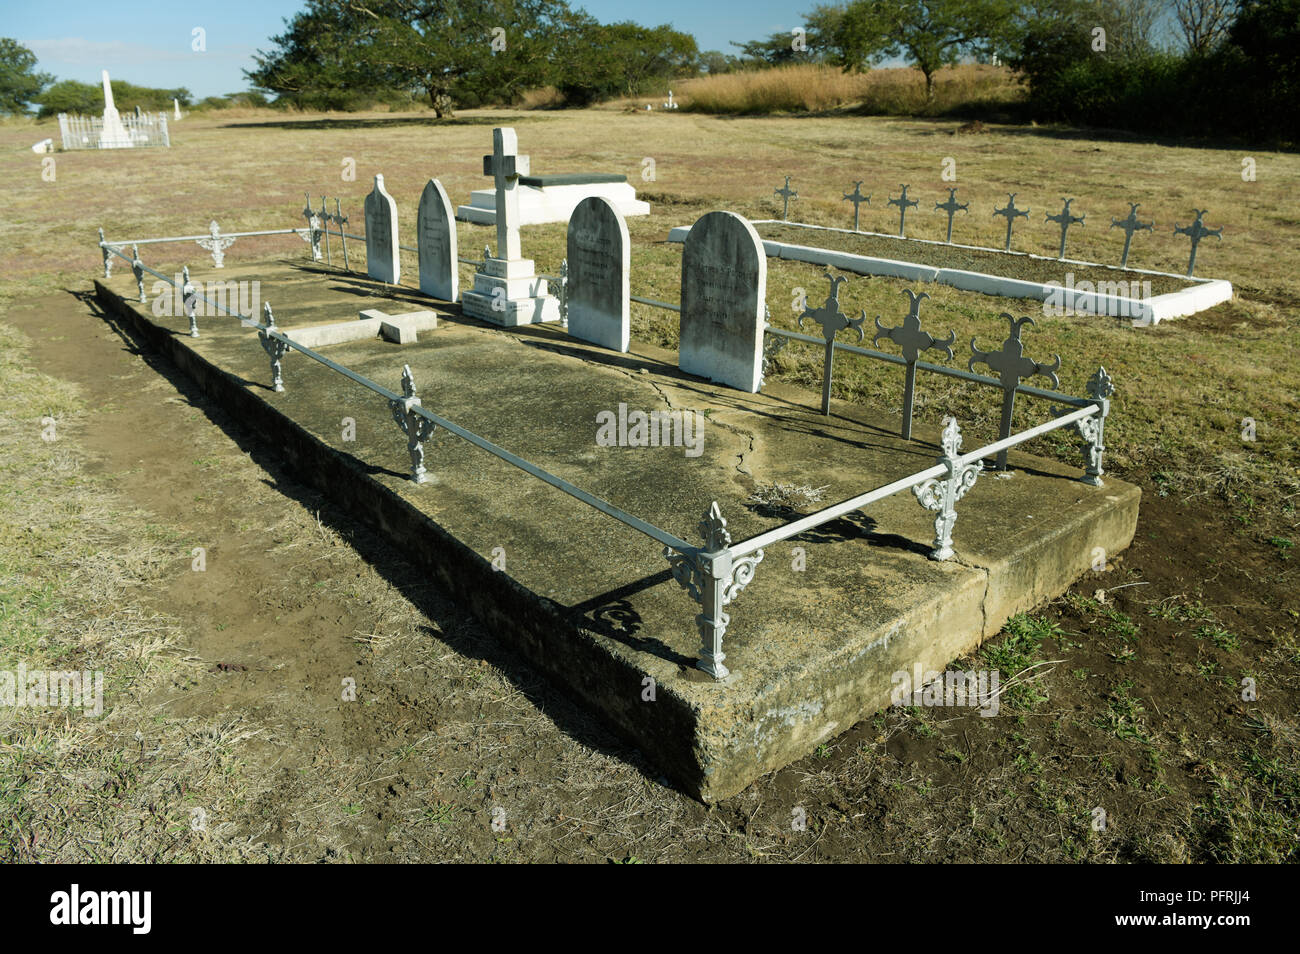 Grave markers for members of Thorneycrofts Mounted Infantry killed in action 15 Dec 1899 at Battle of Colenso, Colony of Natal, South Africa Stock Photo